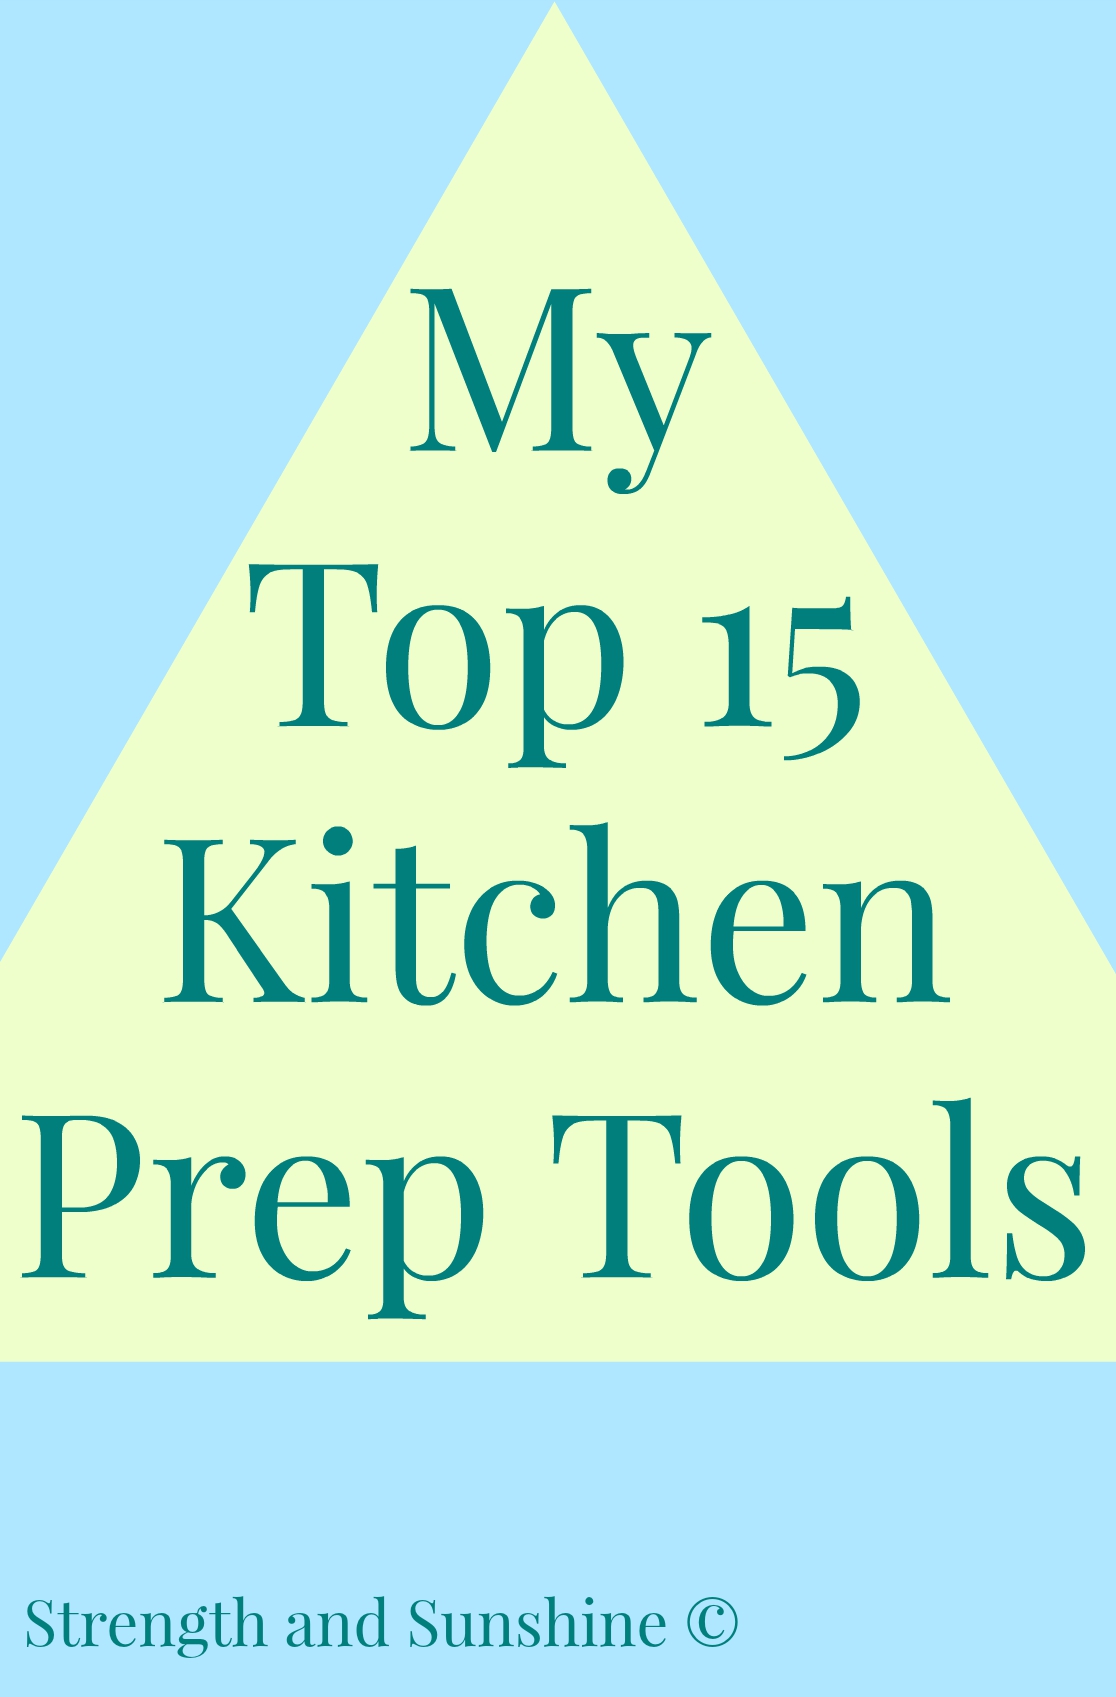 My Top 15 Kitchen Prep Tools | Strength and Sunshine @RebeccaGF666